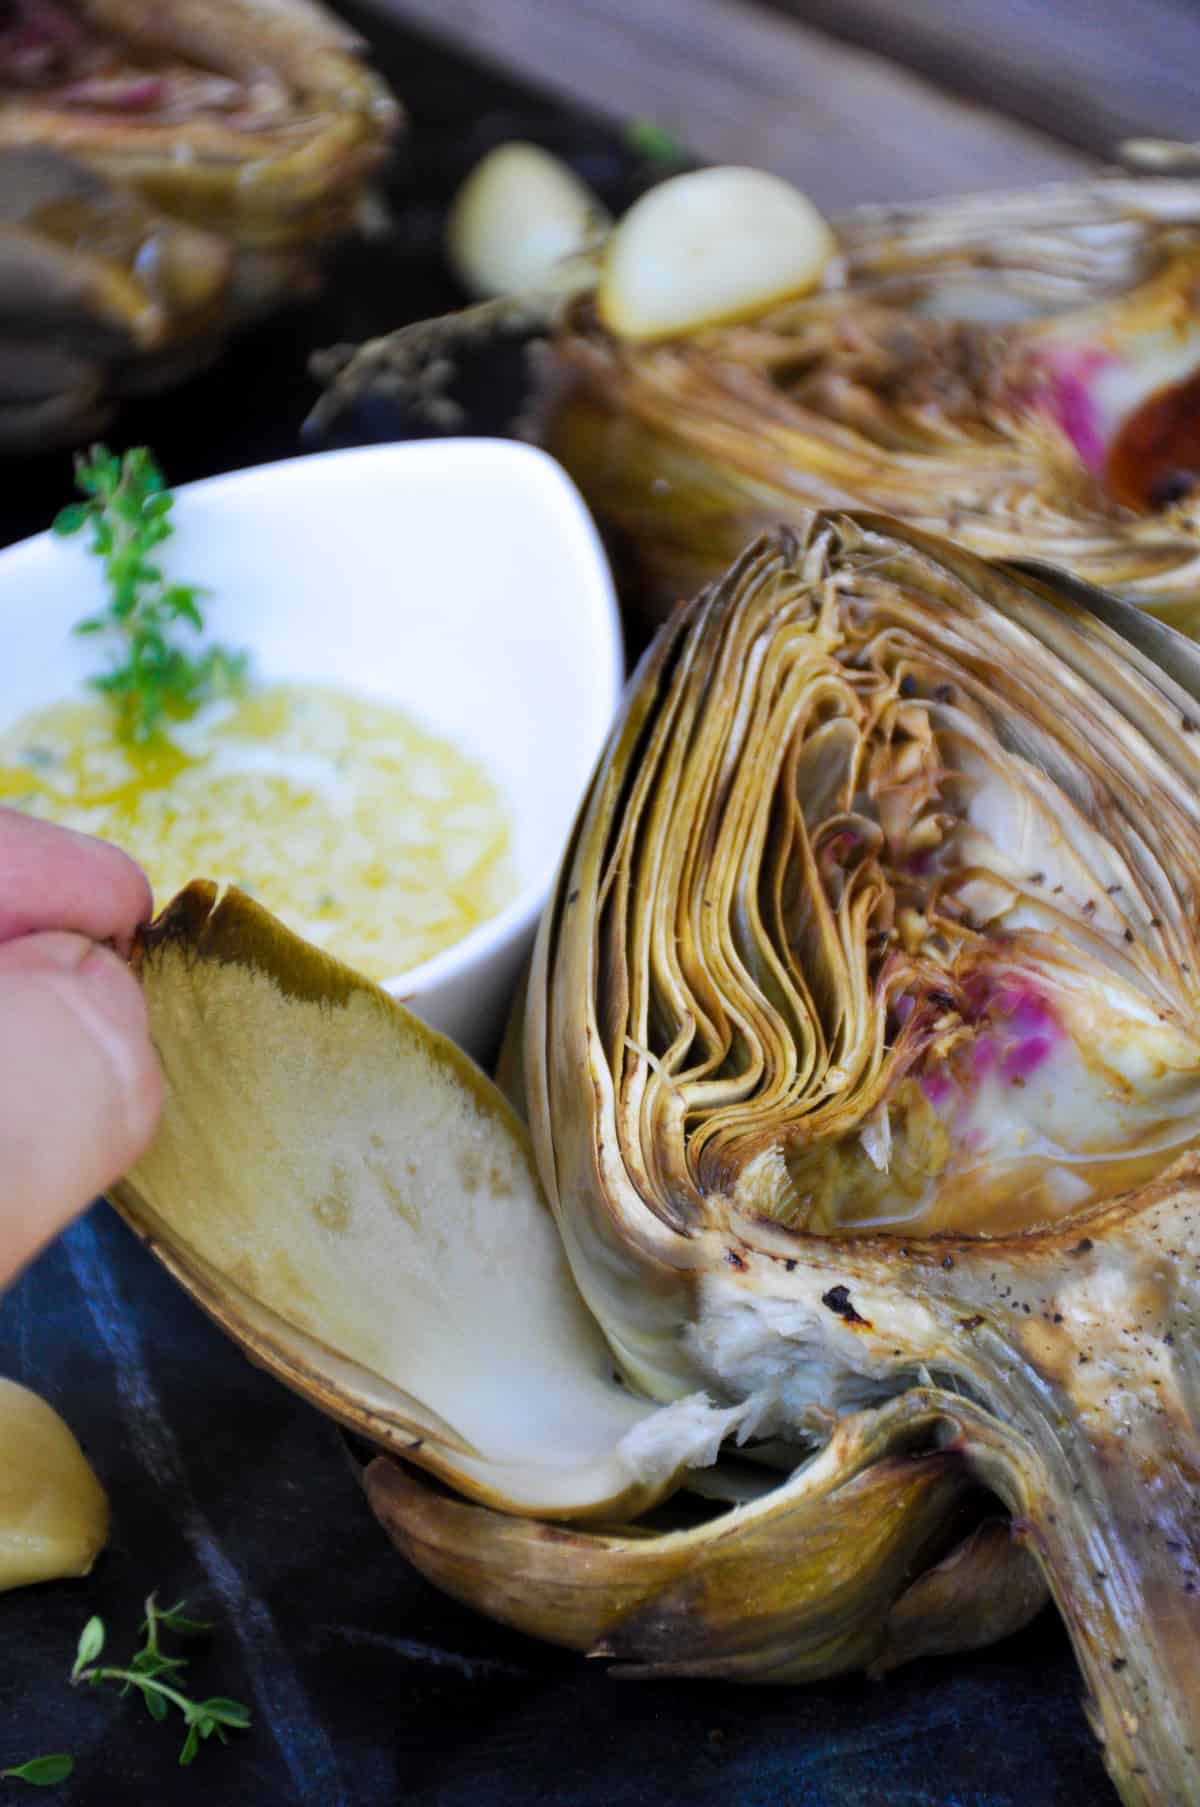 Herbaceous Roasted Artichoke with Garlic and Lemons